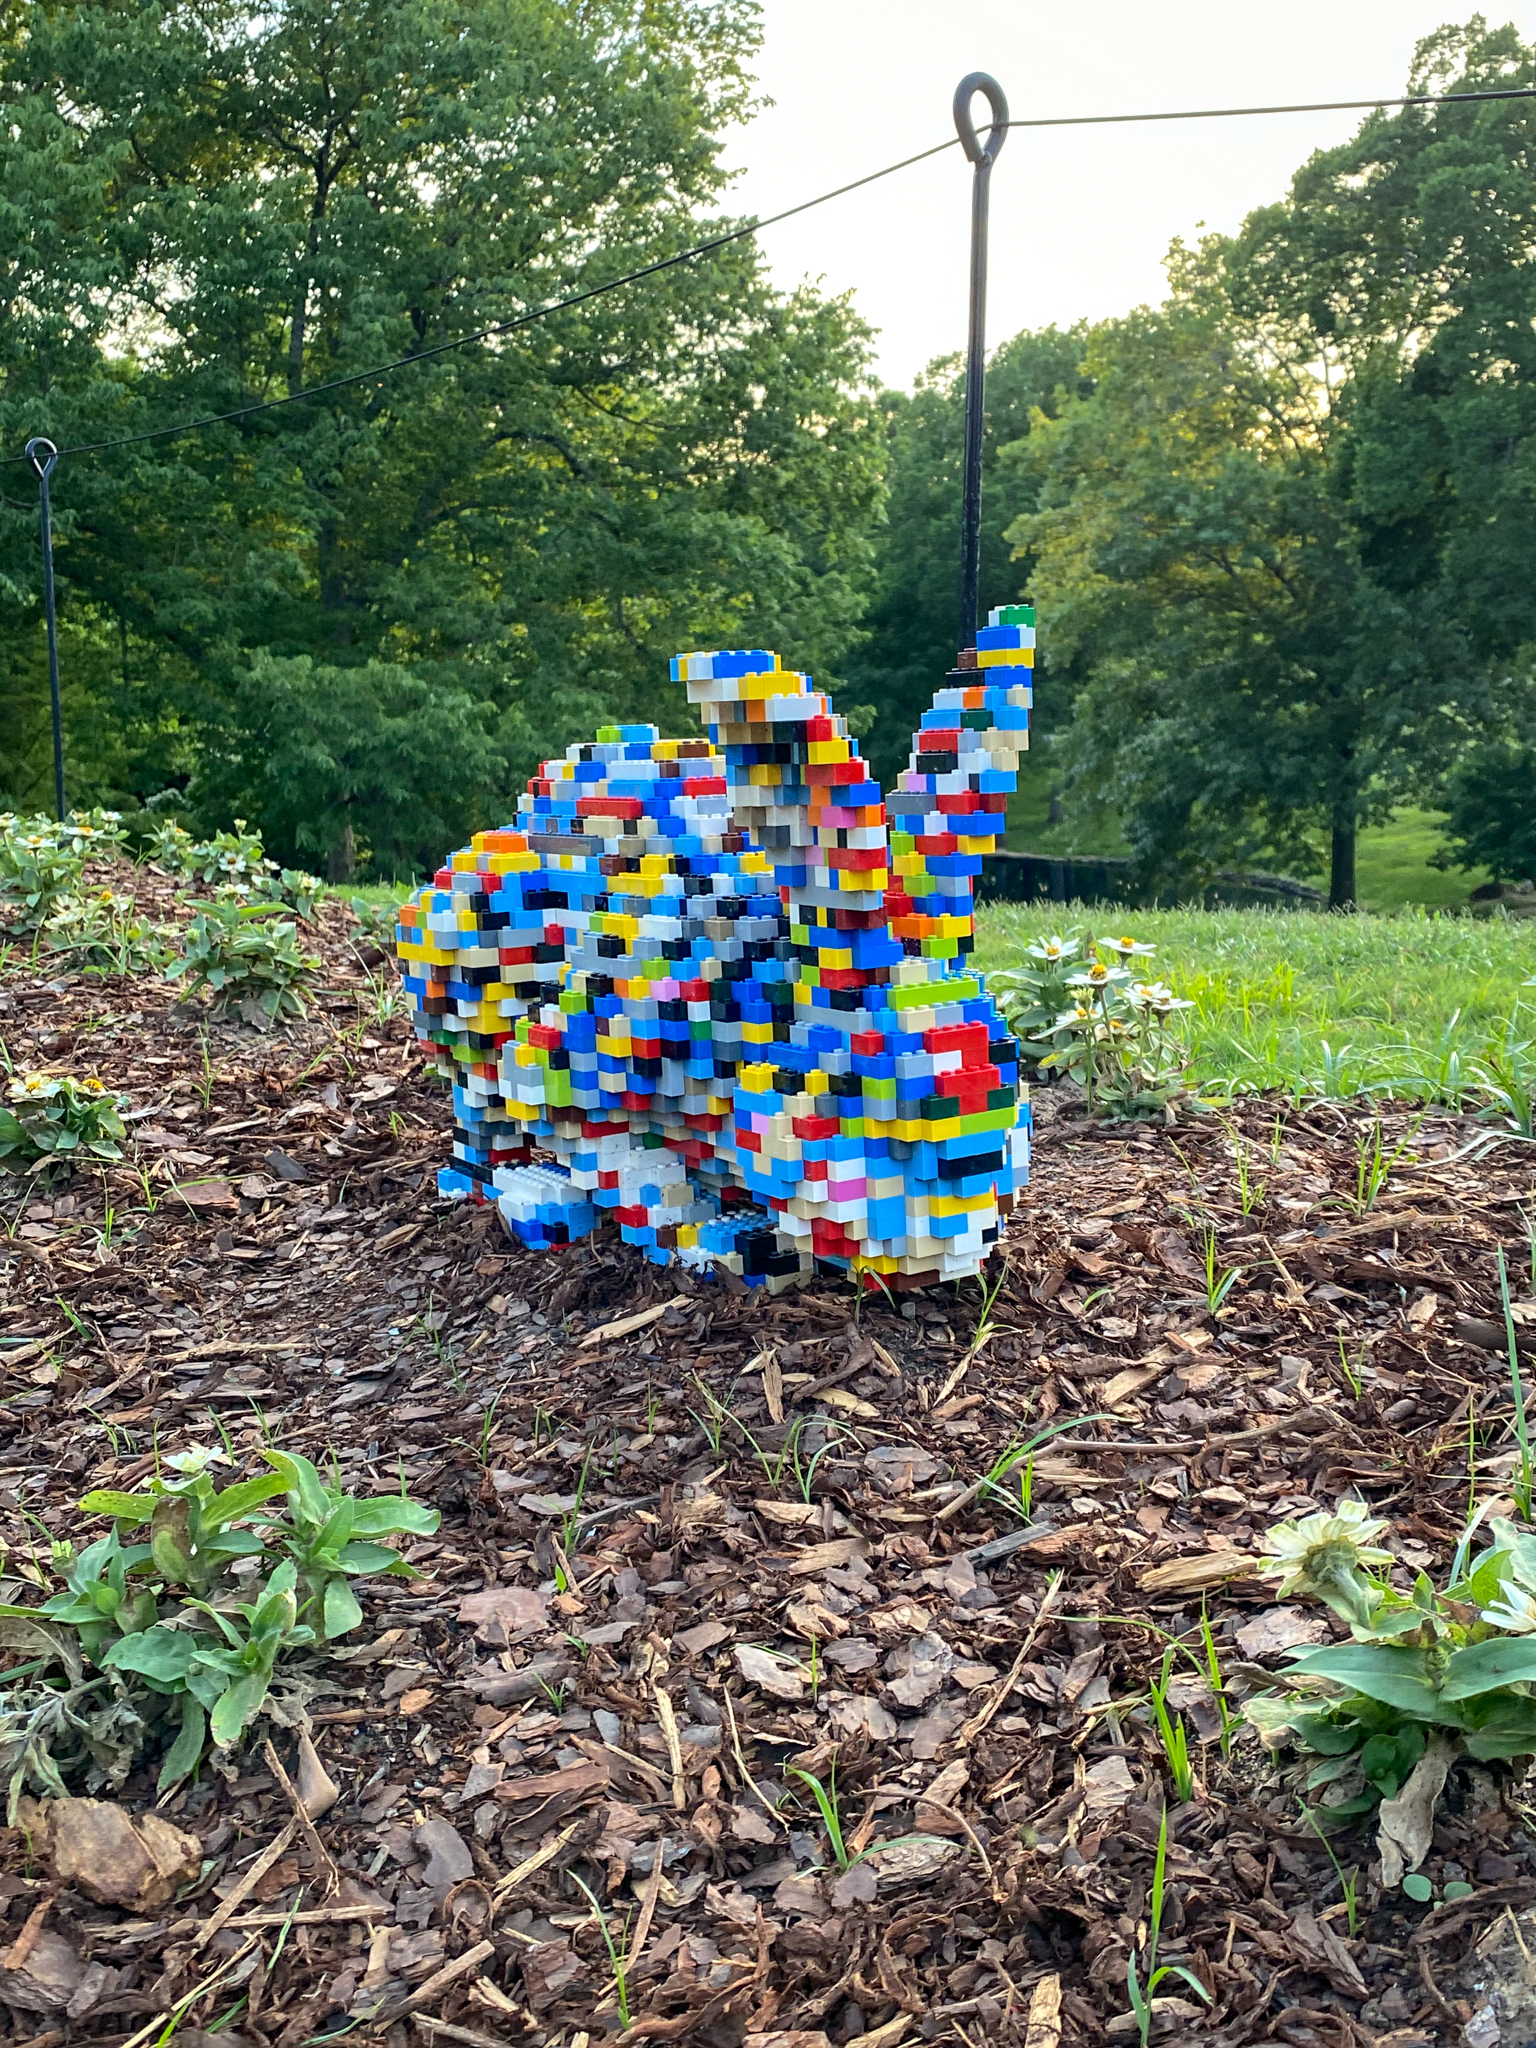 Multicolored Lego rabbit crouched down